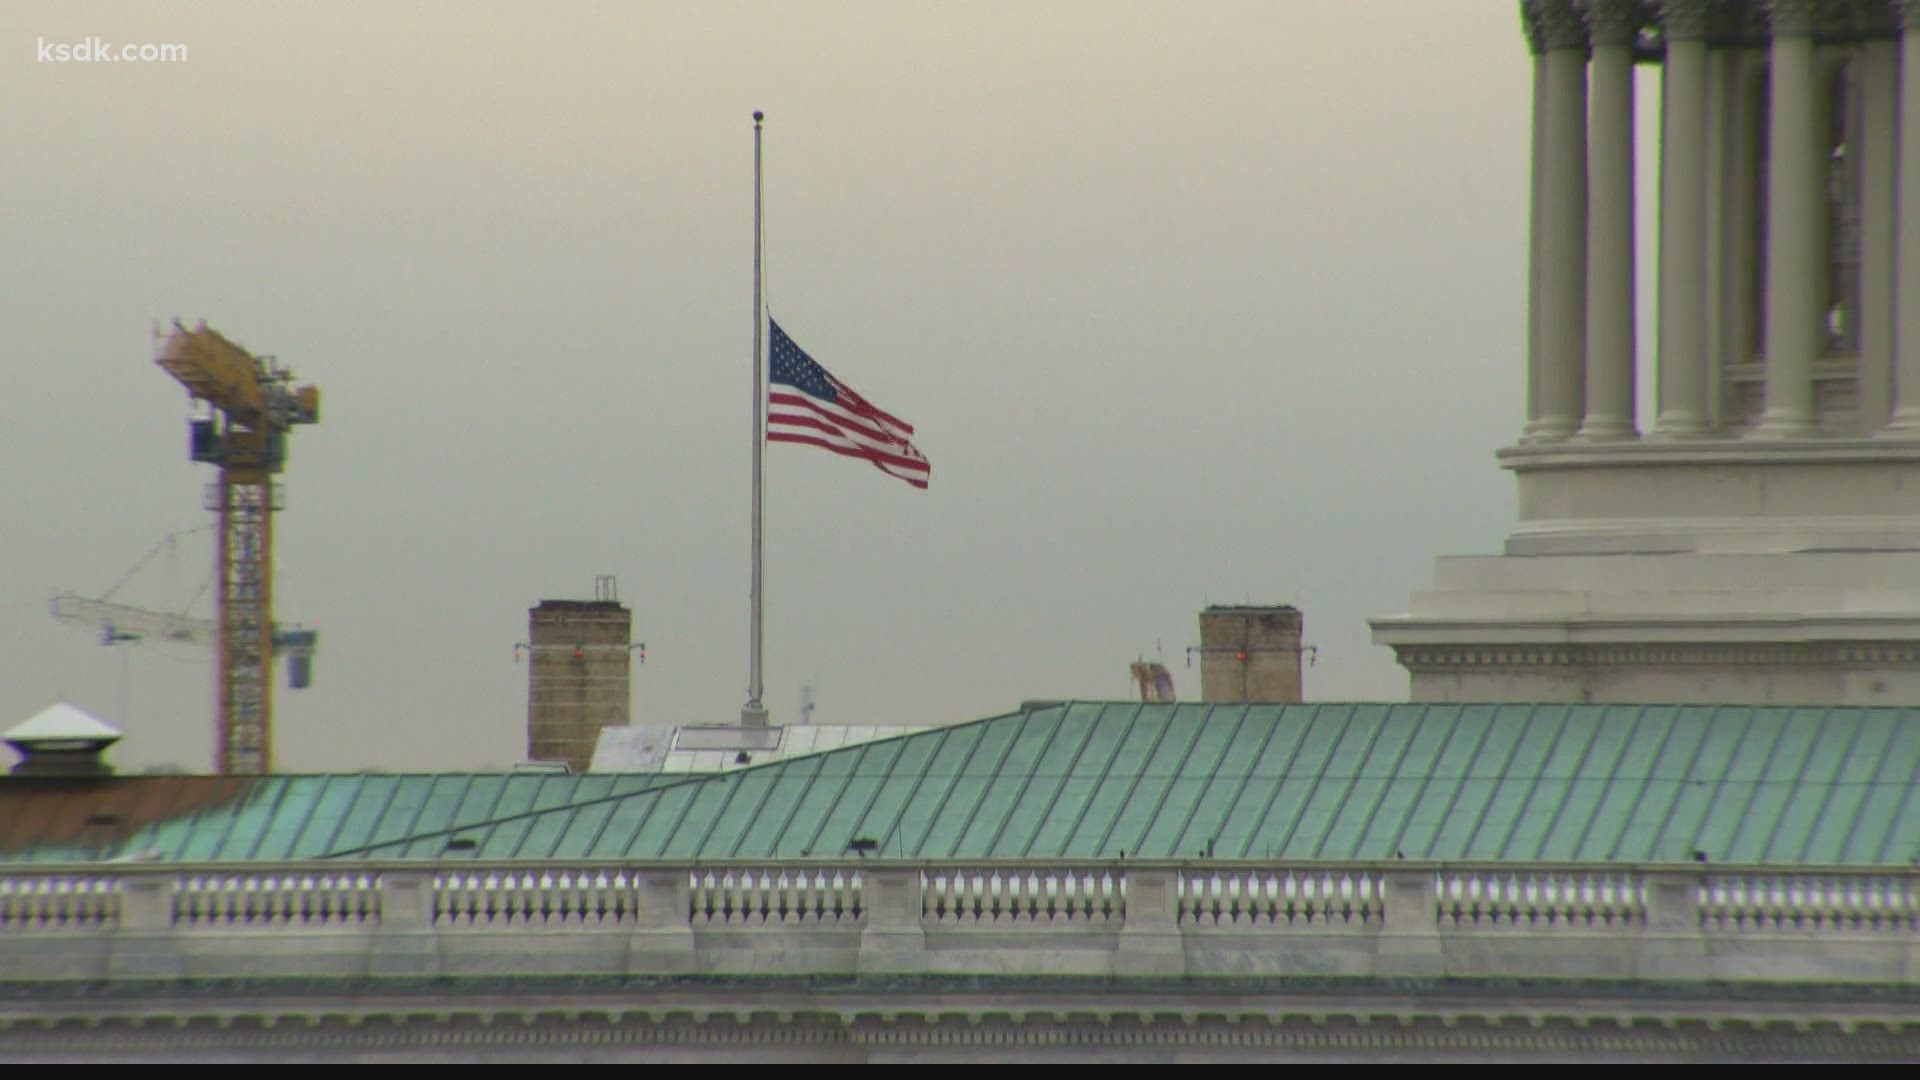 Flags fly at half-staff on the nation's Capitol in honor of a fallen Capitol police officer